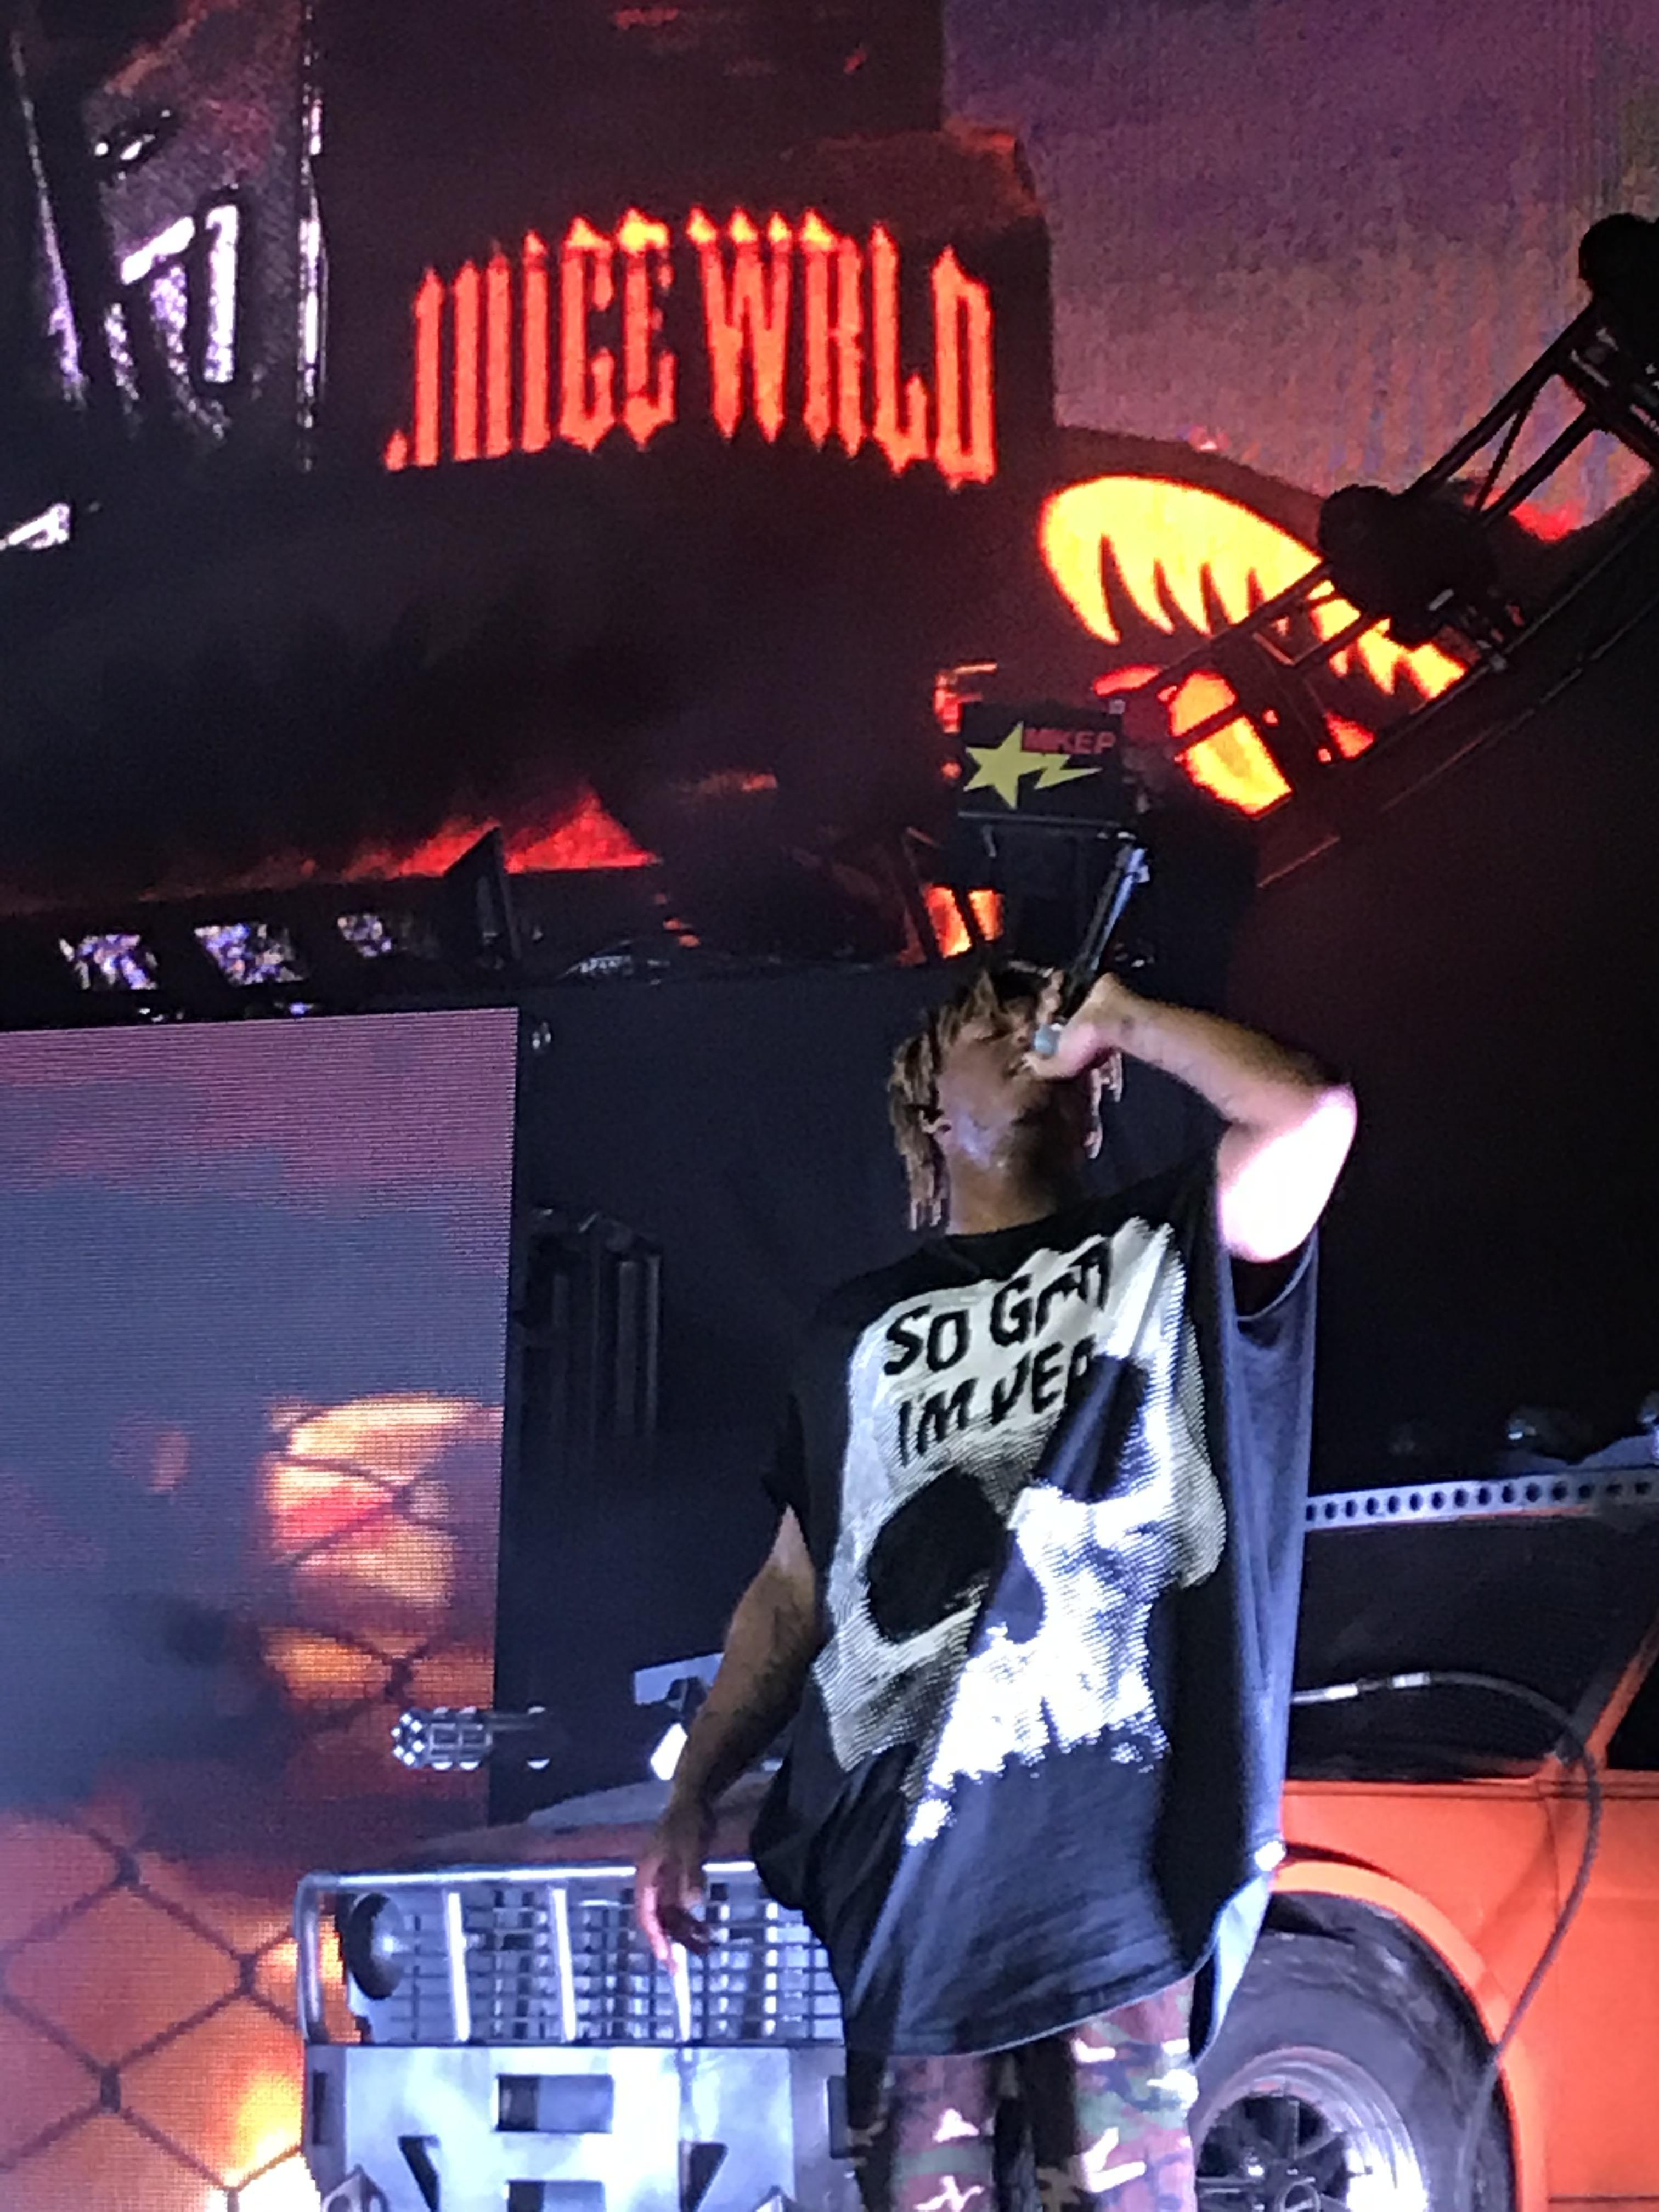 Pic i took of Juice WRLD at the Seattle concert today